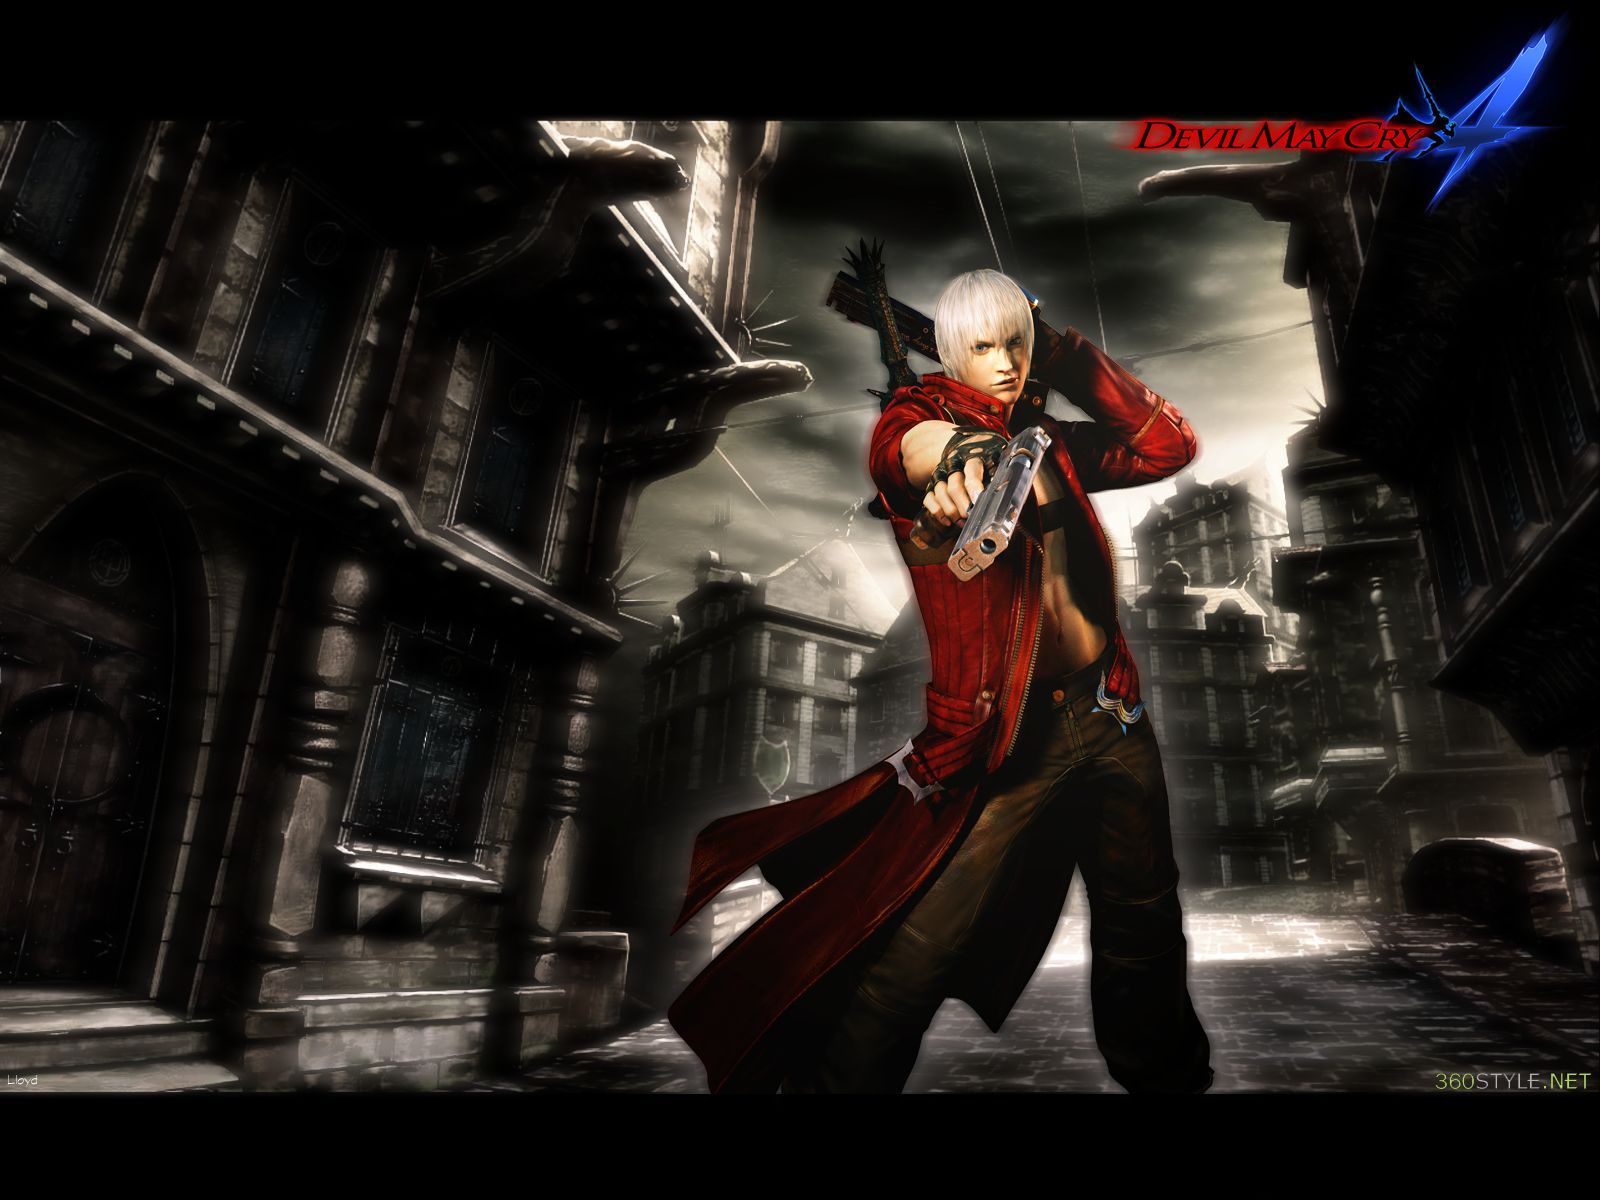 Devil May Cry 4 Wallpaper by igotgame1075 on DeviantArt